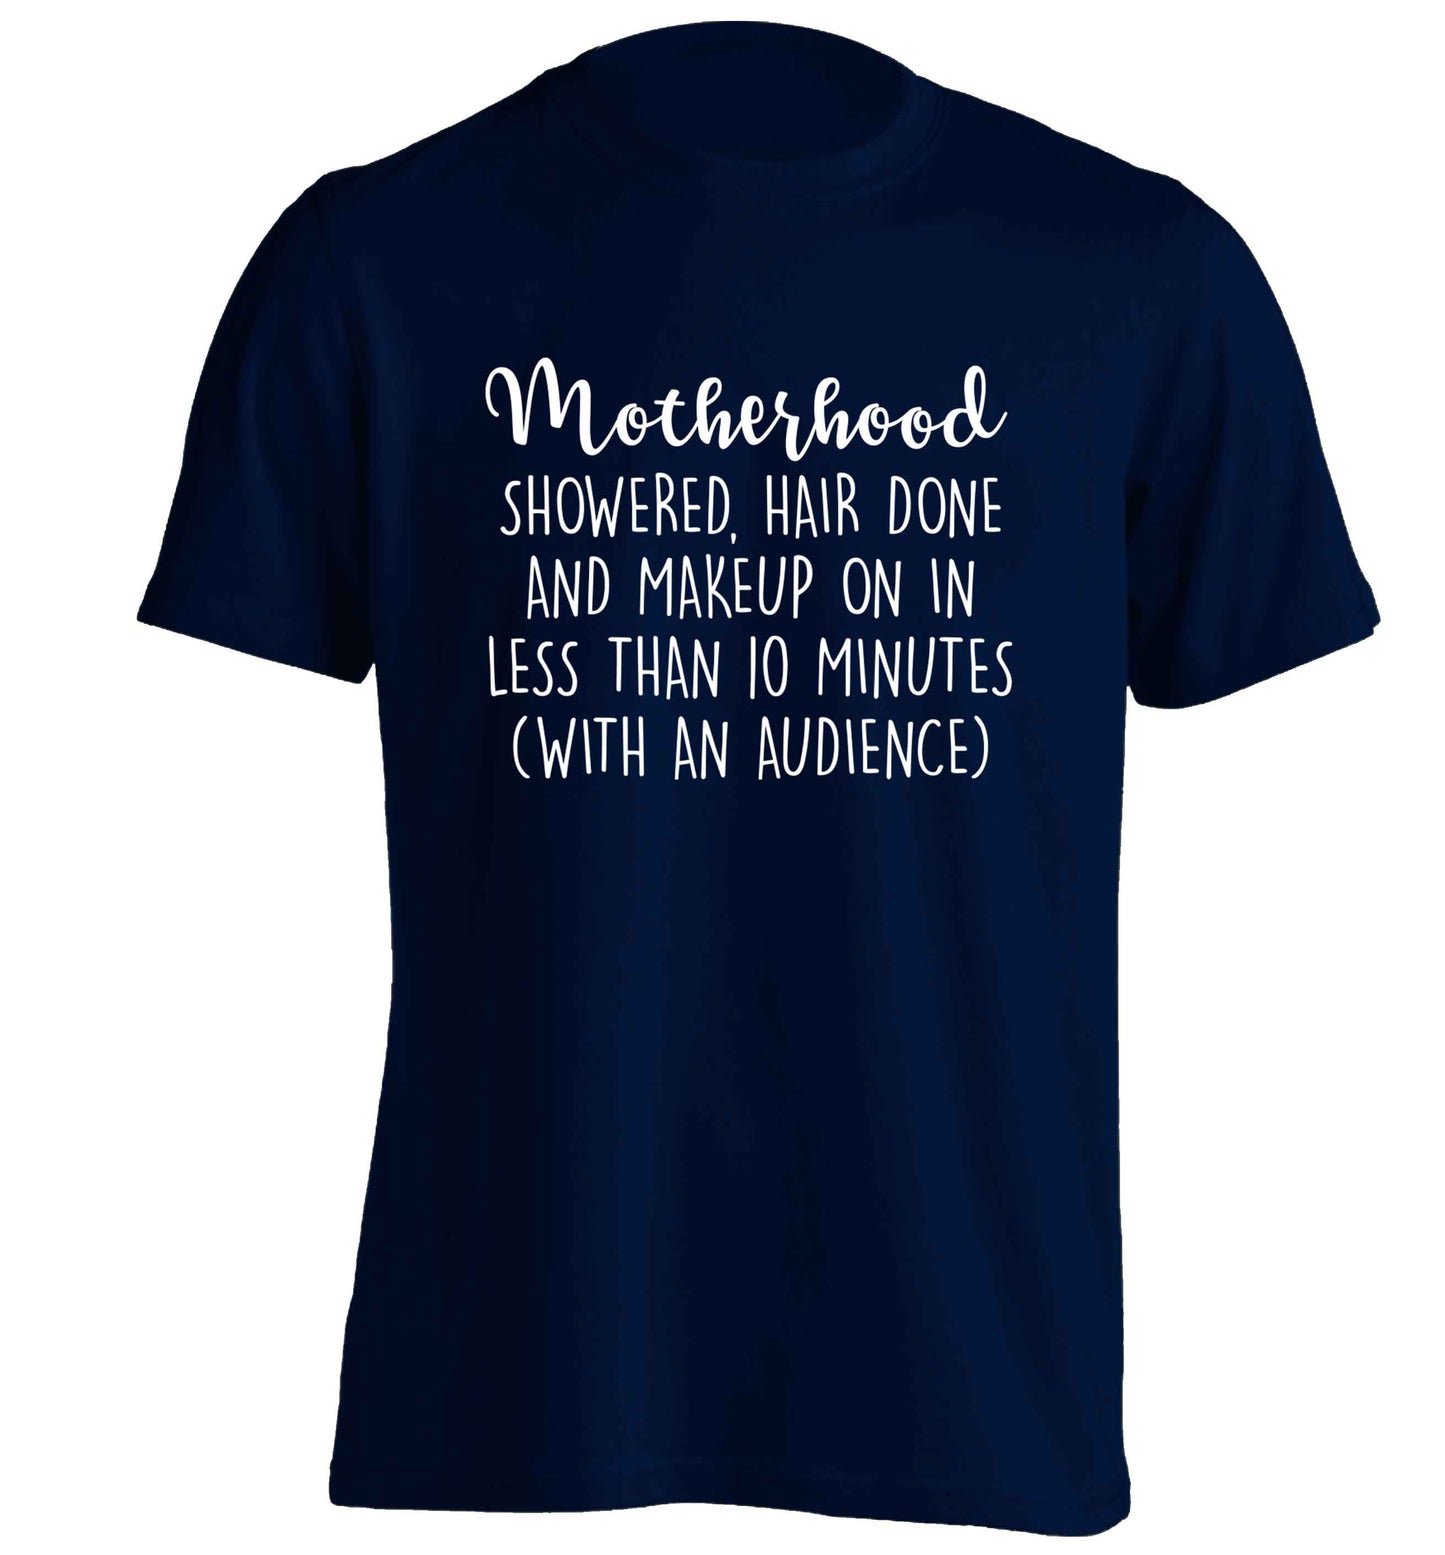 Motherhood, showered, hair done and makeup on adults unisex navy Tshirt 2XL